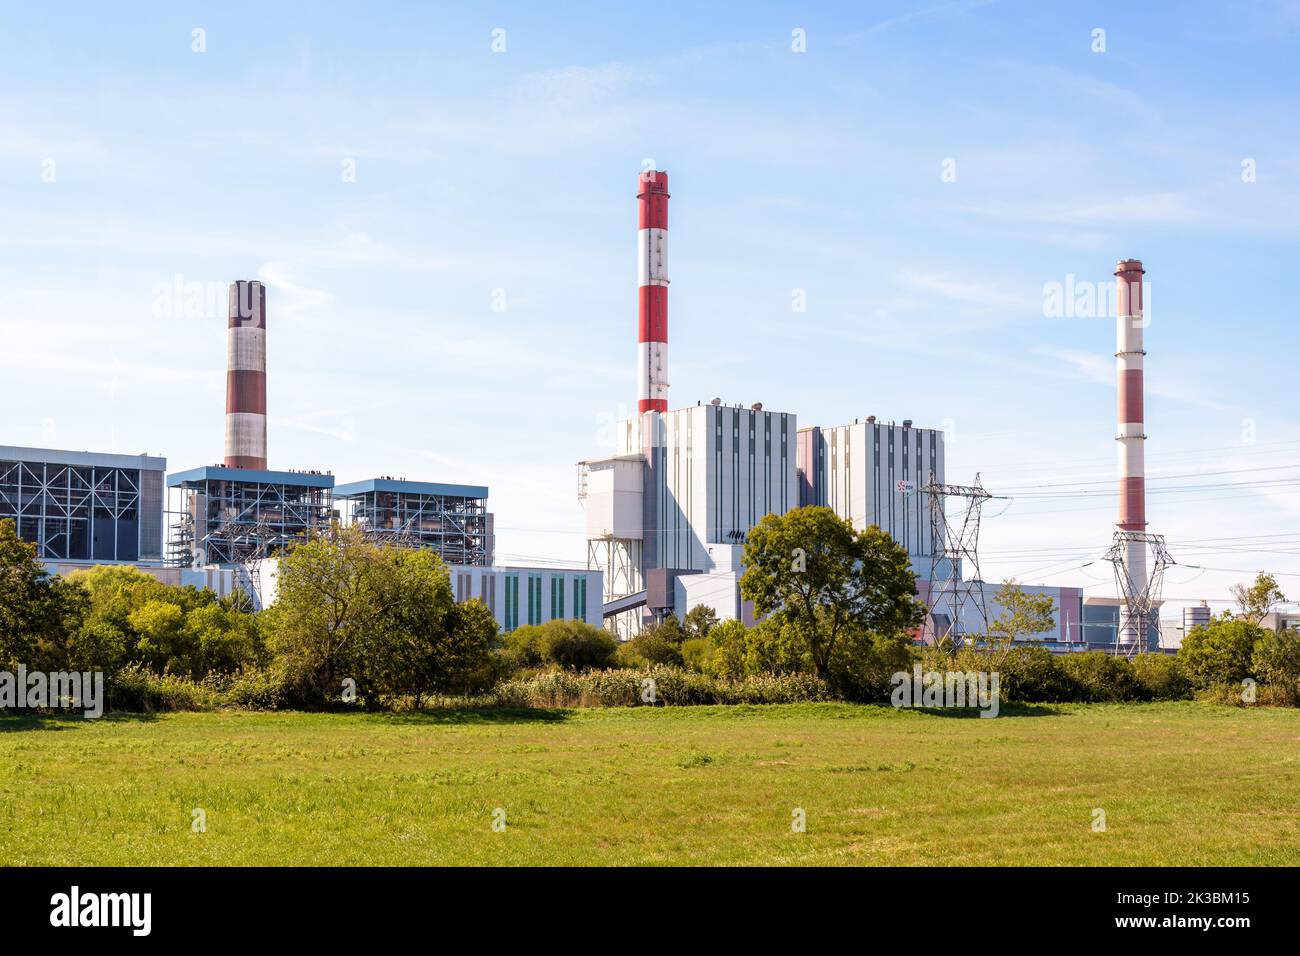 General view of the EDF coal-fired power station of Cordemais, France, with three red and white smokestacks, seen from the surrounding meadows. Stock Photo